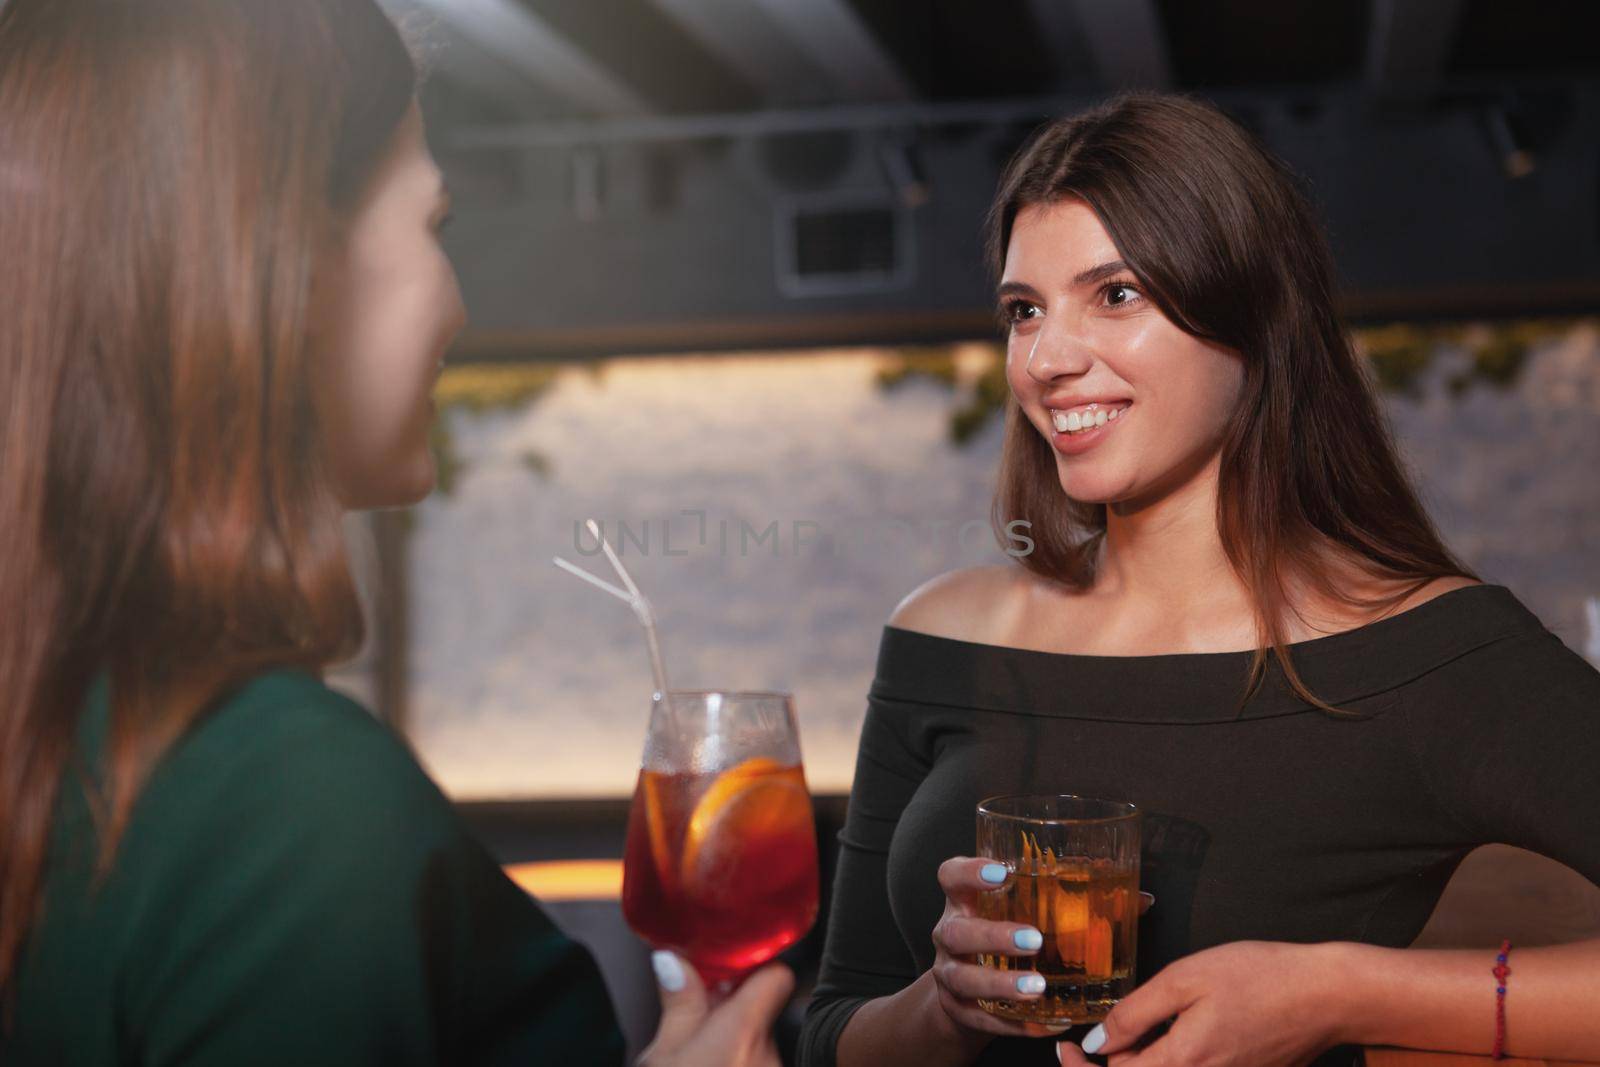 Attractive cheerful woman enjoying drinks with her friend at the restaurant in the evening